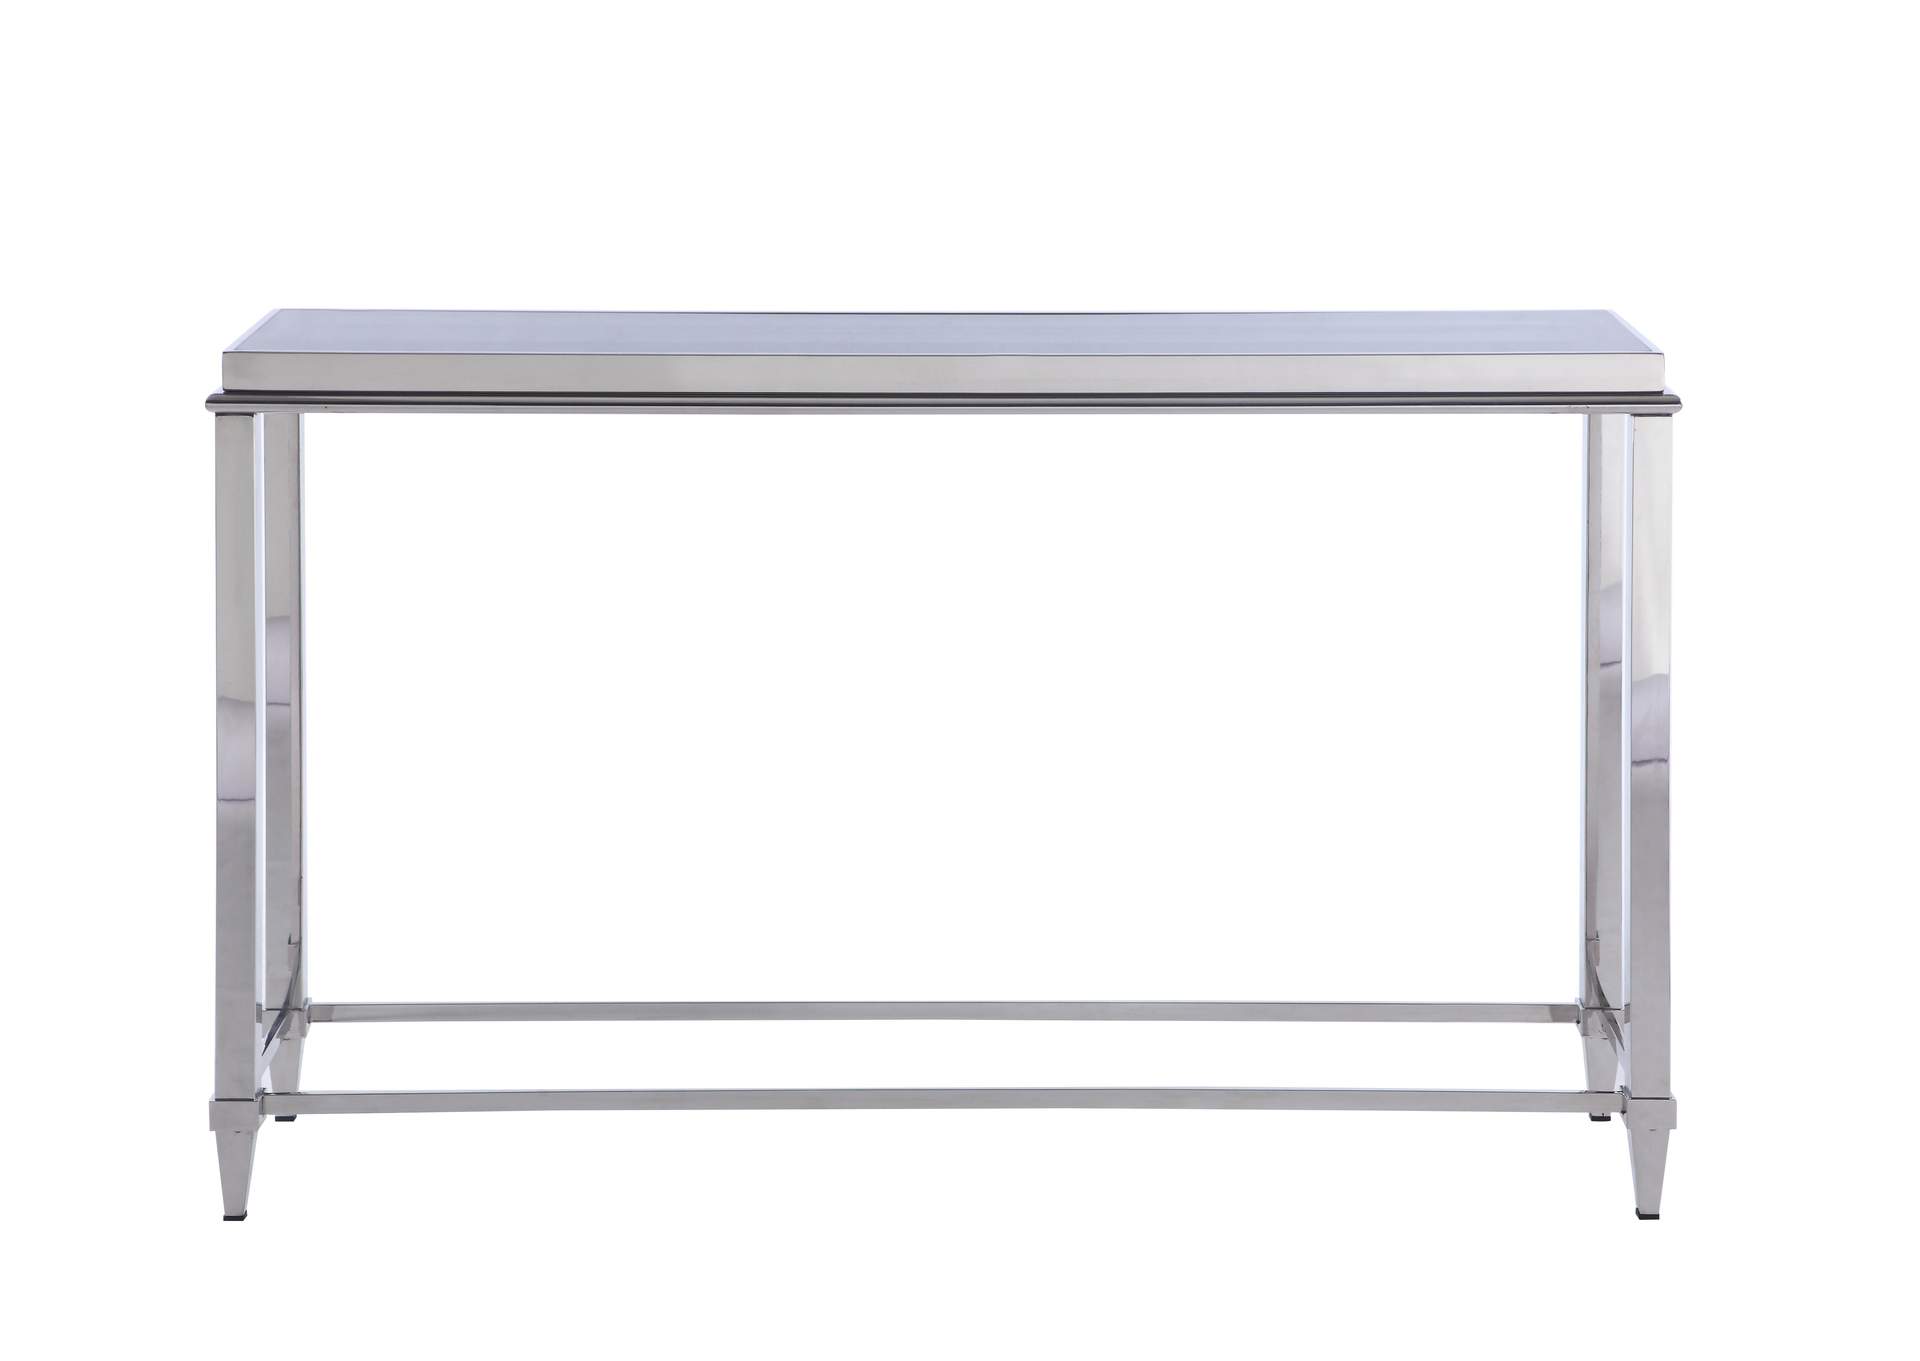 Polisehd SS Contemporary Sofa Table w/ Glass Top & Gray Trim,Chintaly Imports